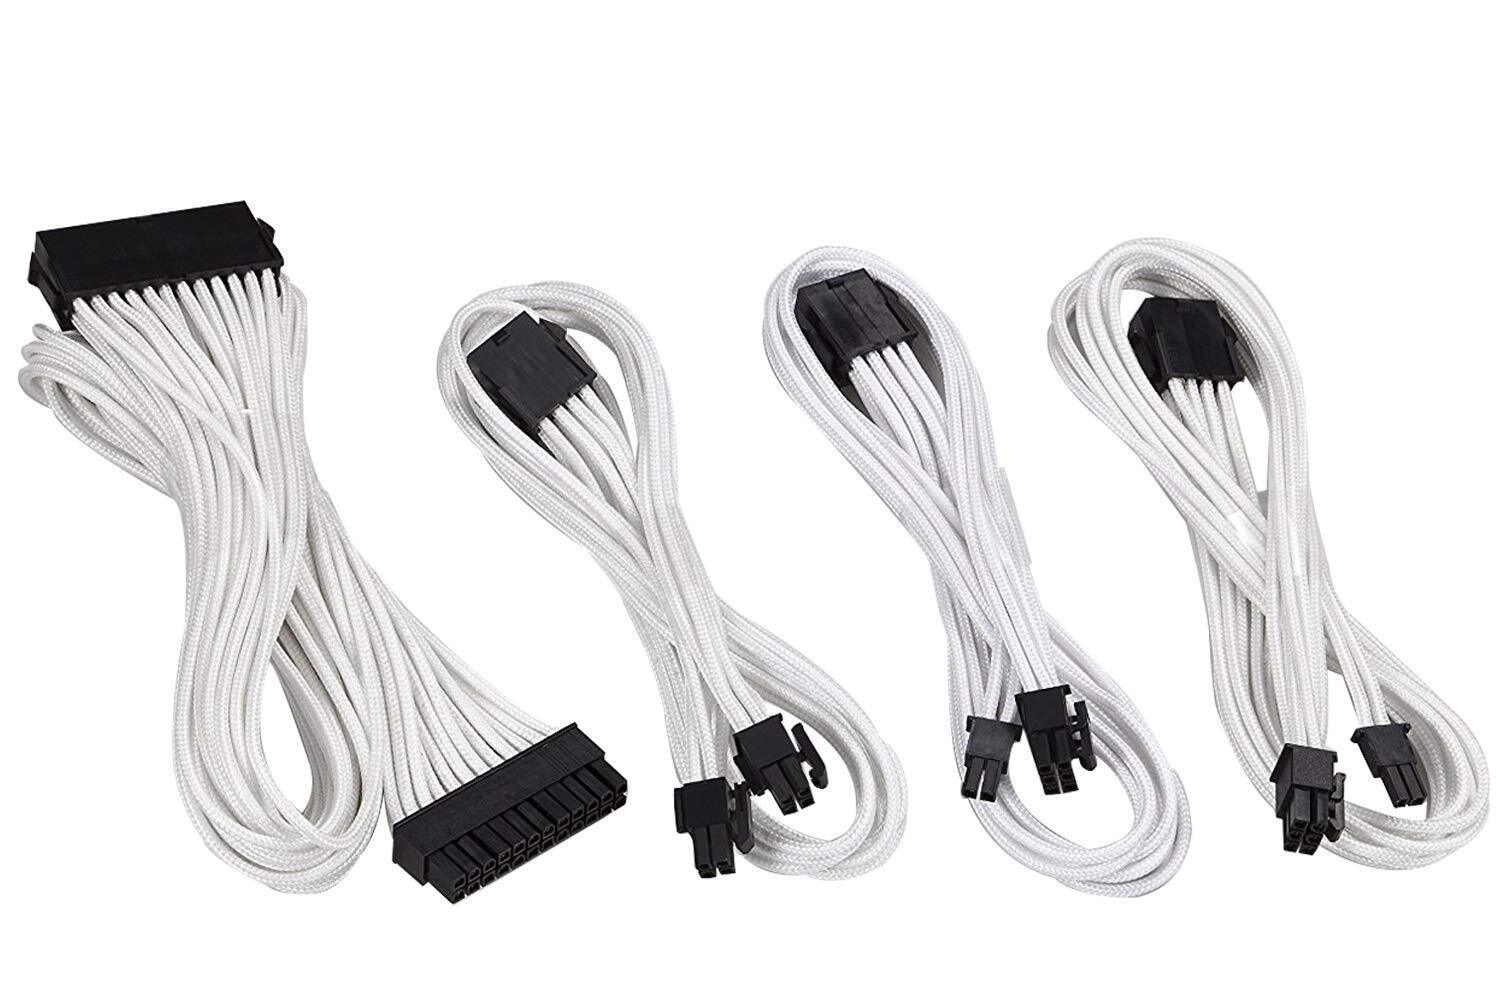 Sleeved Cable Cable Extension For Power Supply With Extrasleeved 24pin 6pin 4+4 